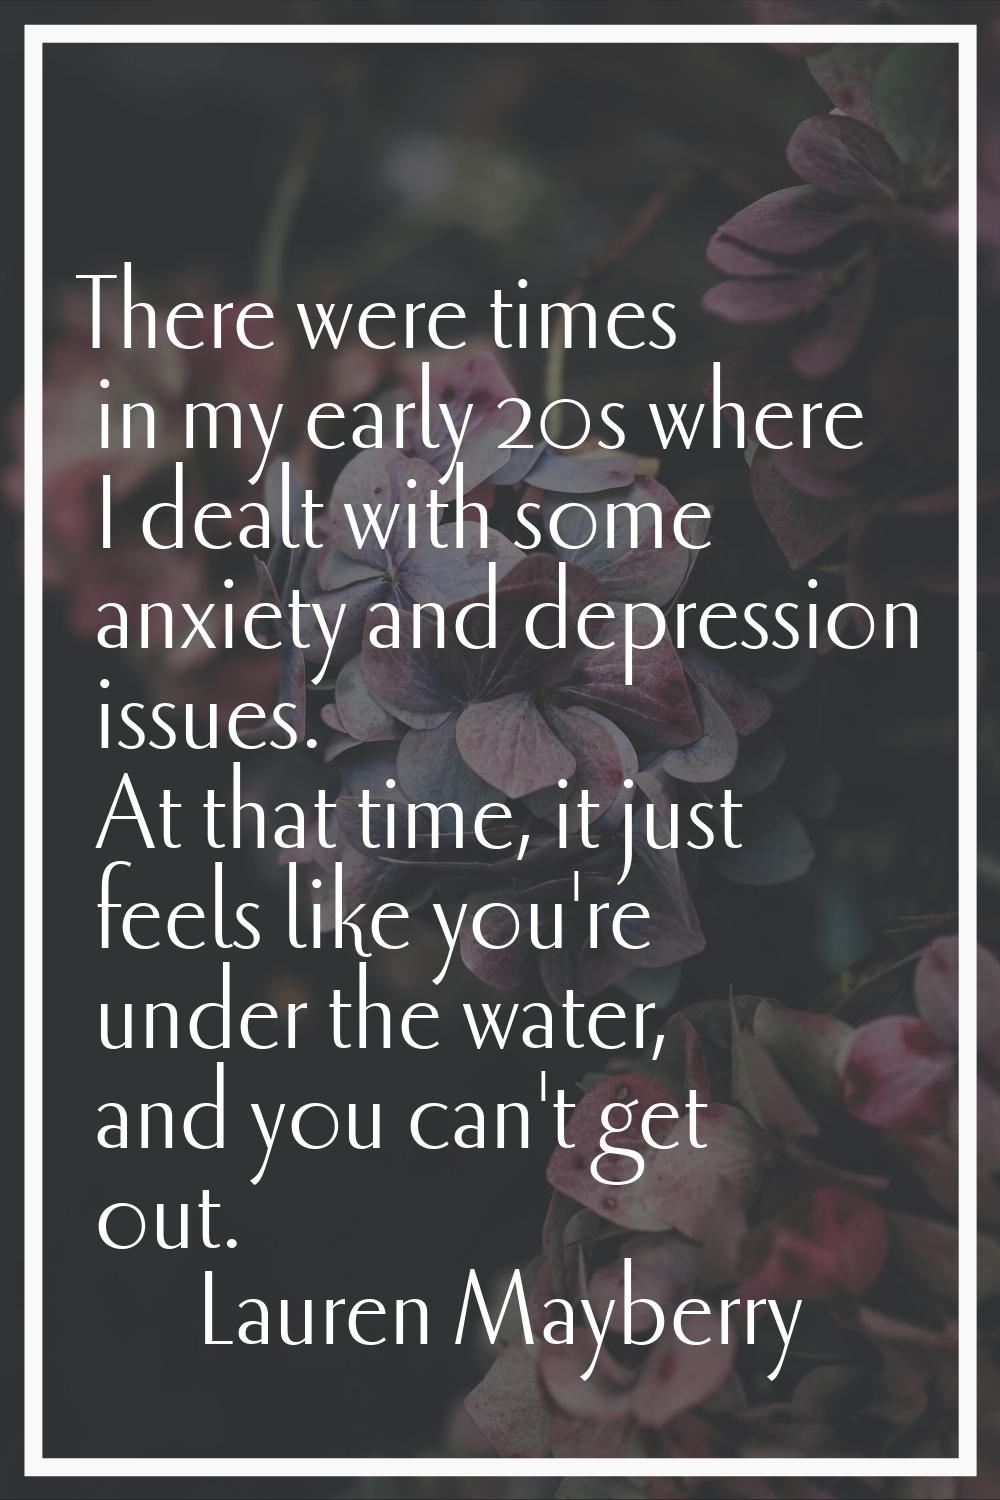 There were times in my early 20s where I dealt with some anxiety and depression issues. At that tim